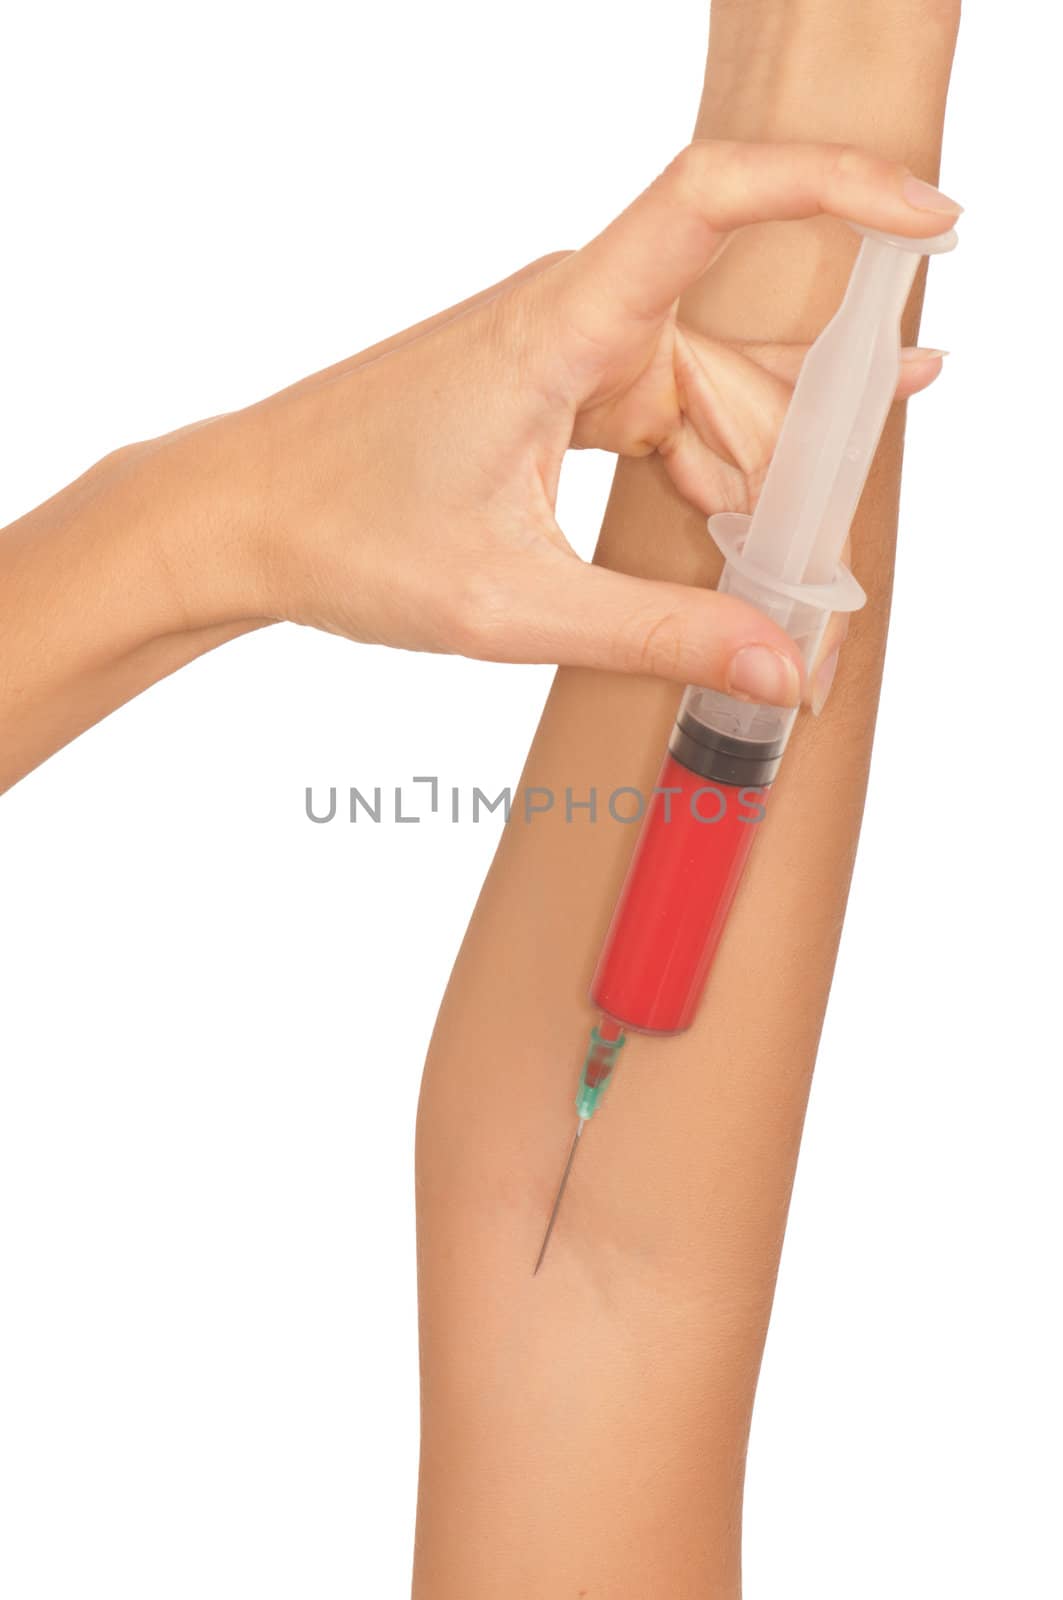 Woman use syringe with a new synthetic hard drugs mixed with blood for escape from reality